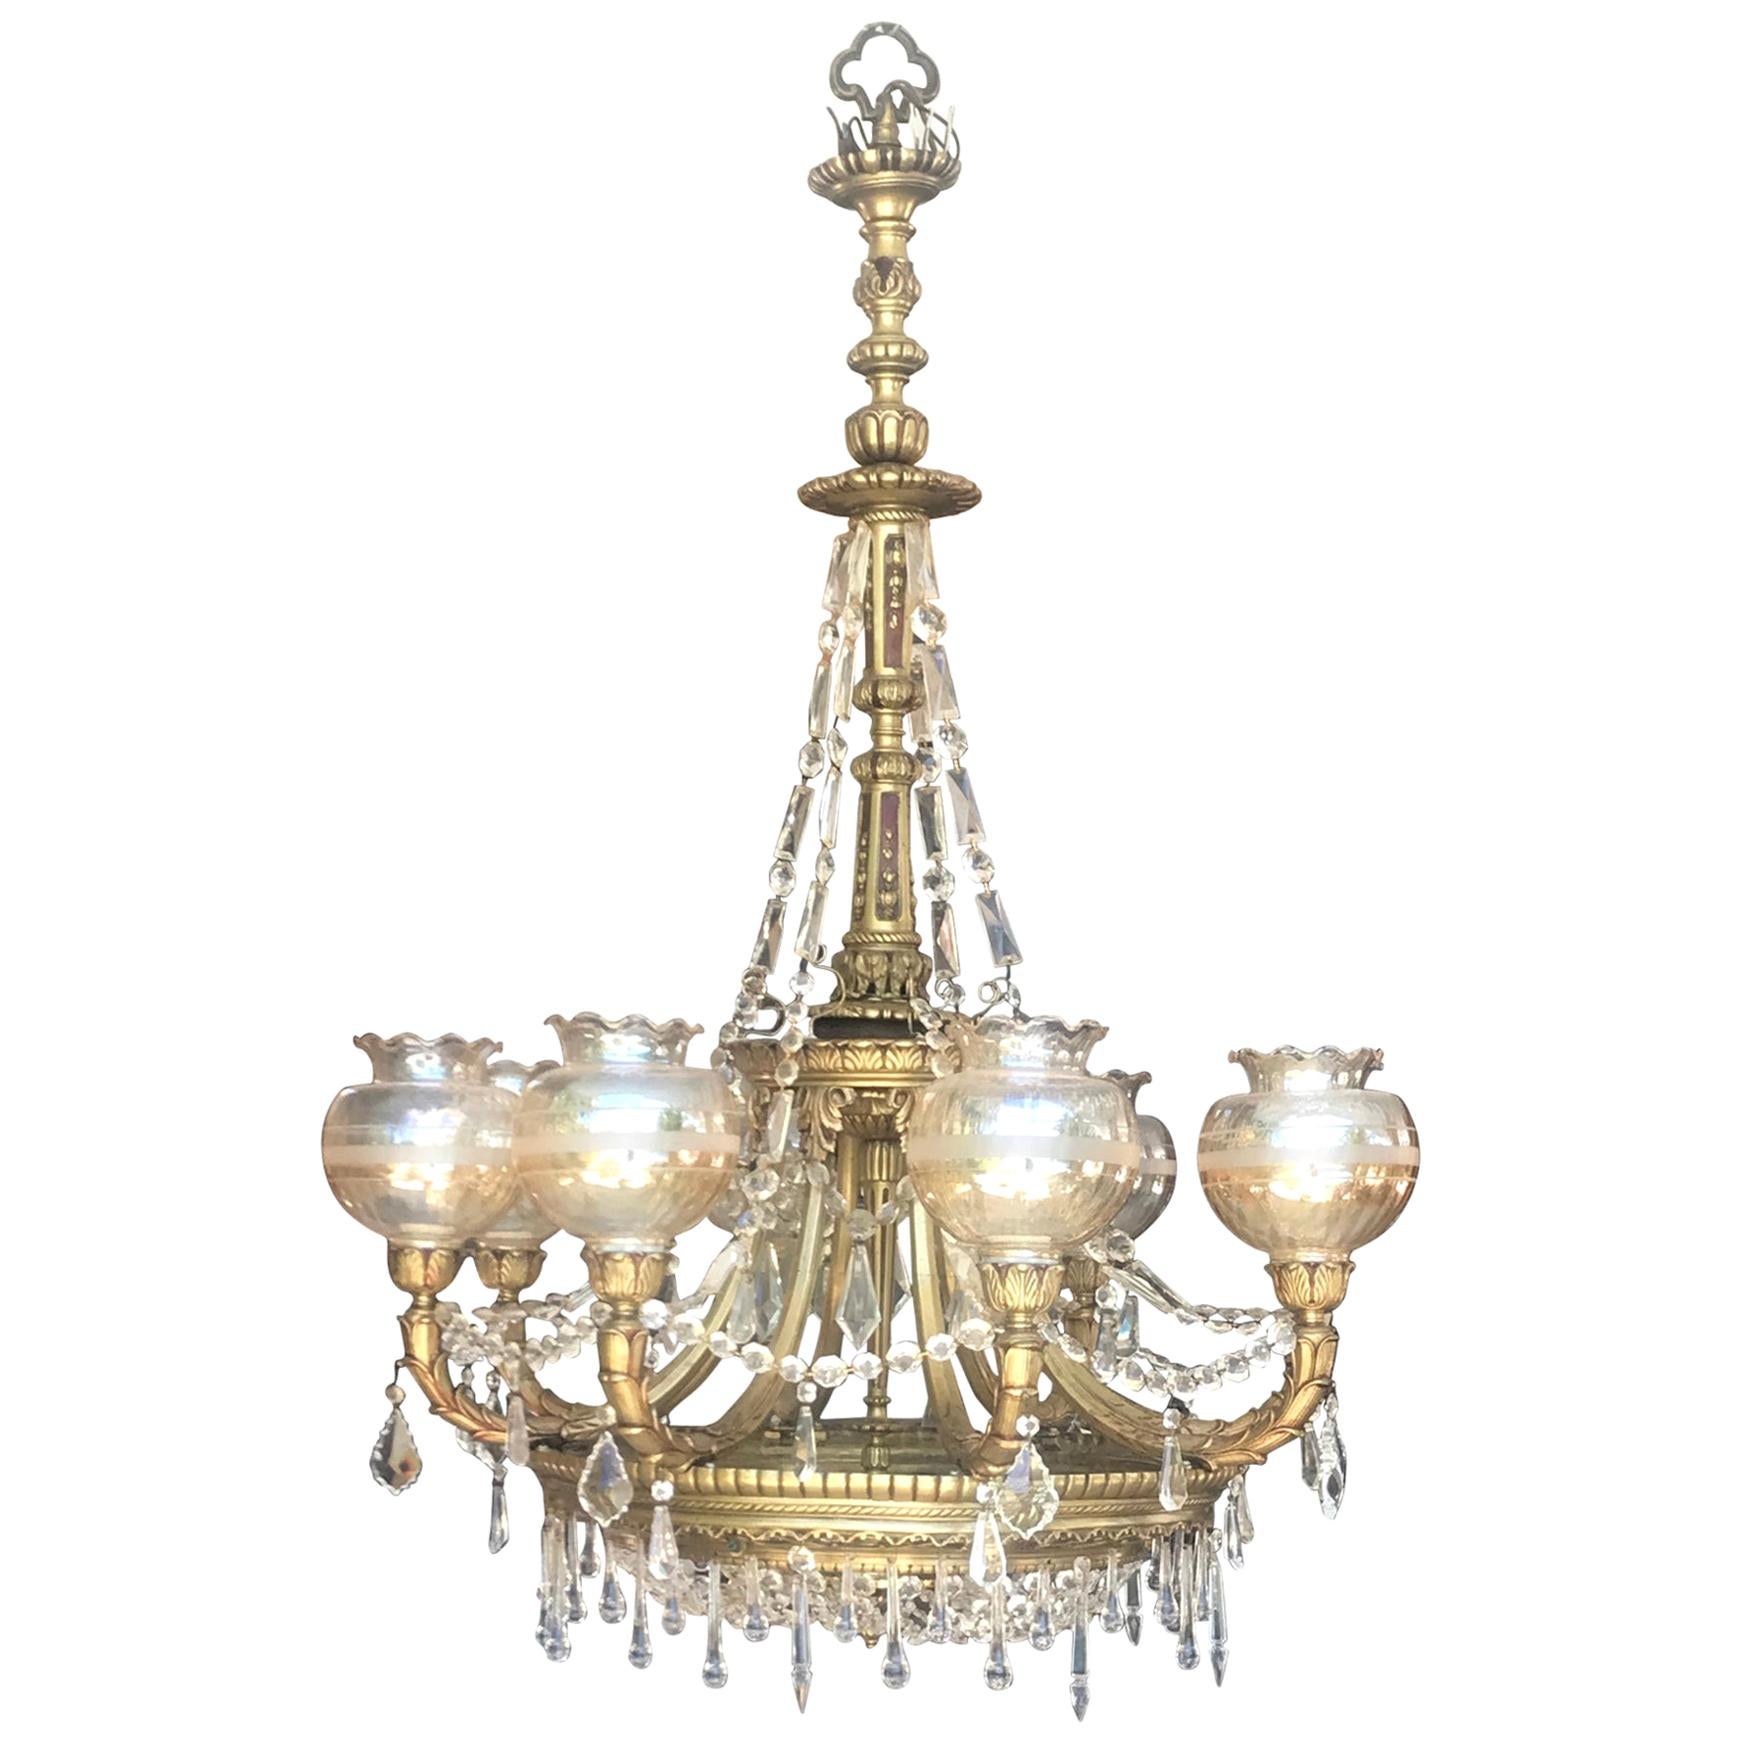 Neoclassical 8-Lamp Shades Spanish Crystal and Bronze Handcrafted Chandelier